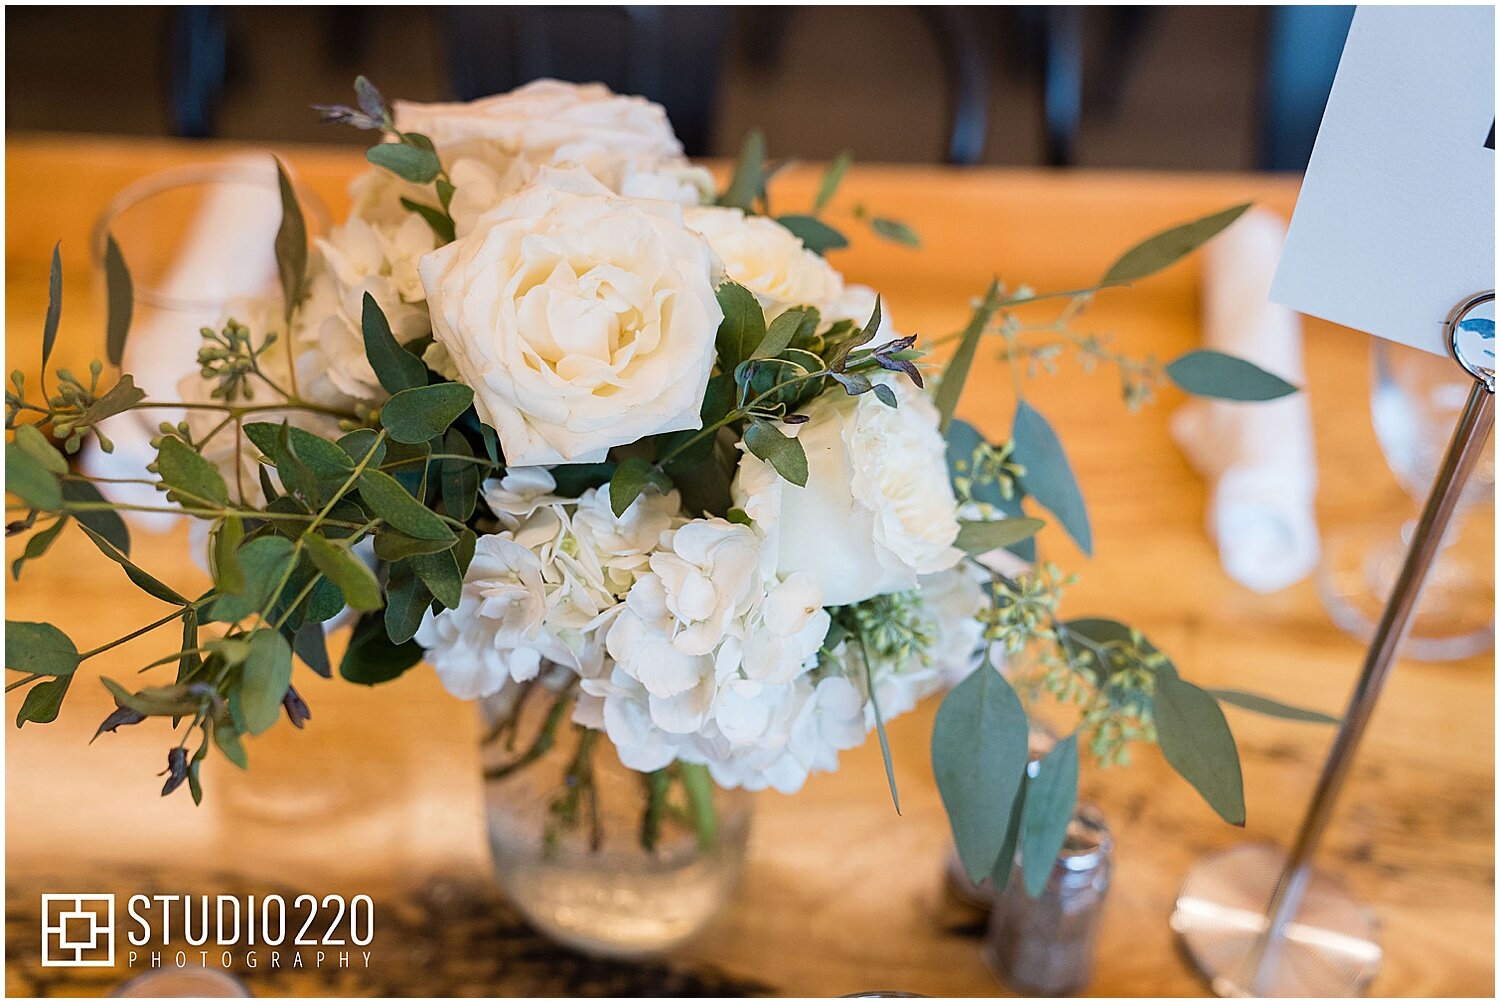  Small white floral centerpiece for wedding reception 